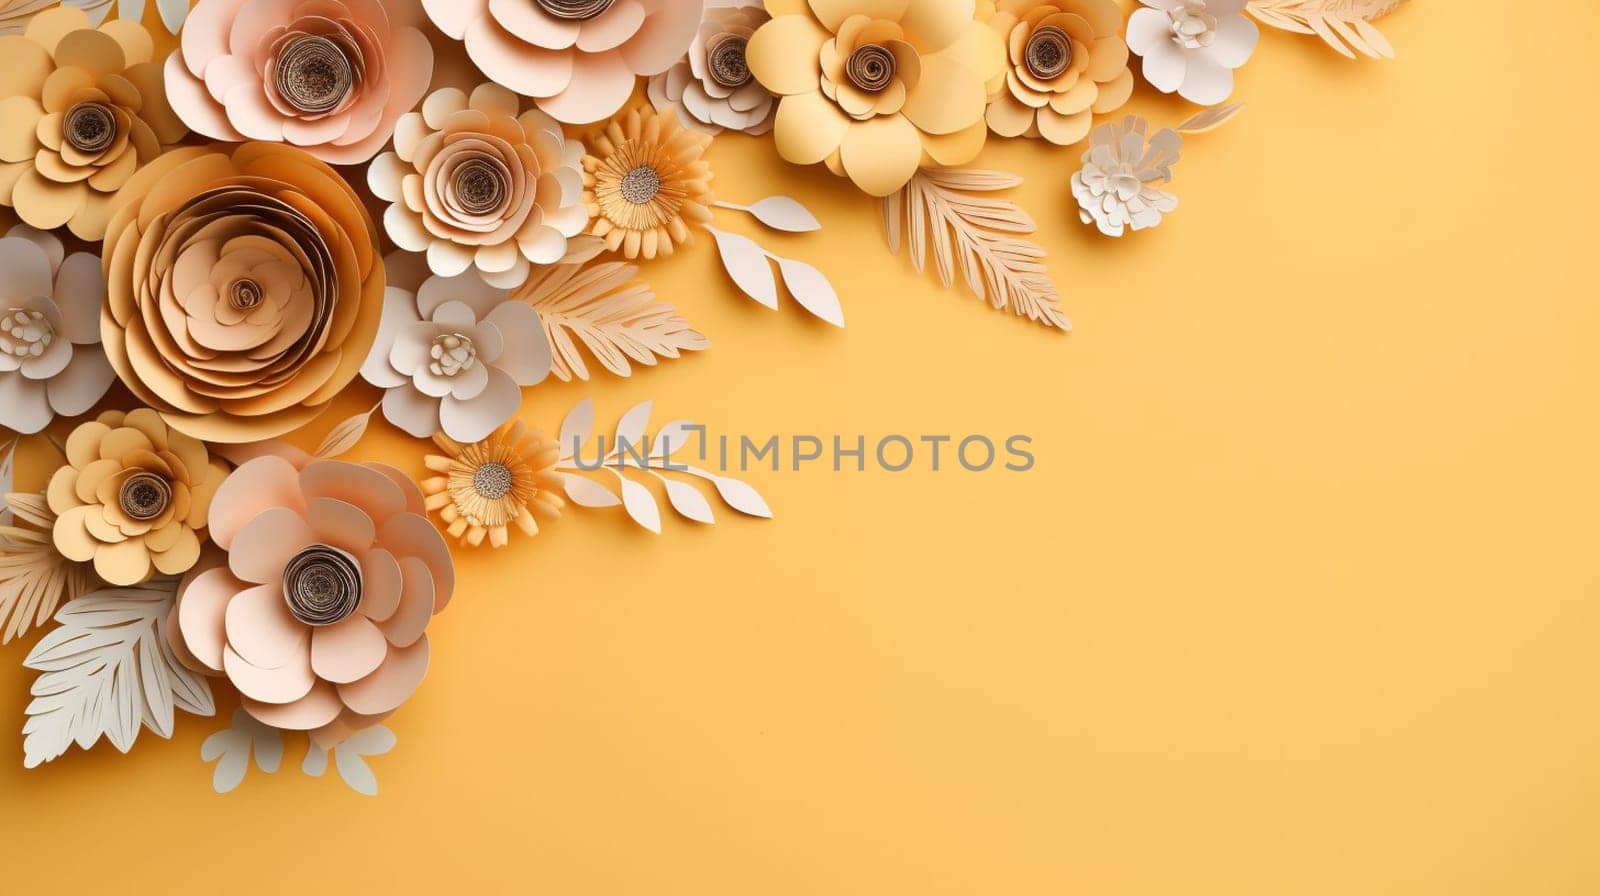 An array of intricate paper flowers in shades of yellow, orange, and white, beautifully arranged on a bright yellow background, showcasing a stunning variety of blooms and foliage by kizuneko